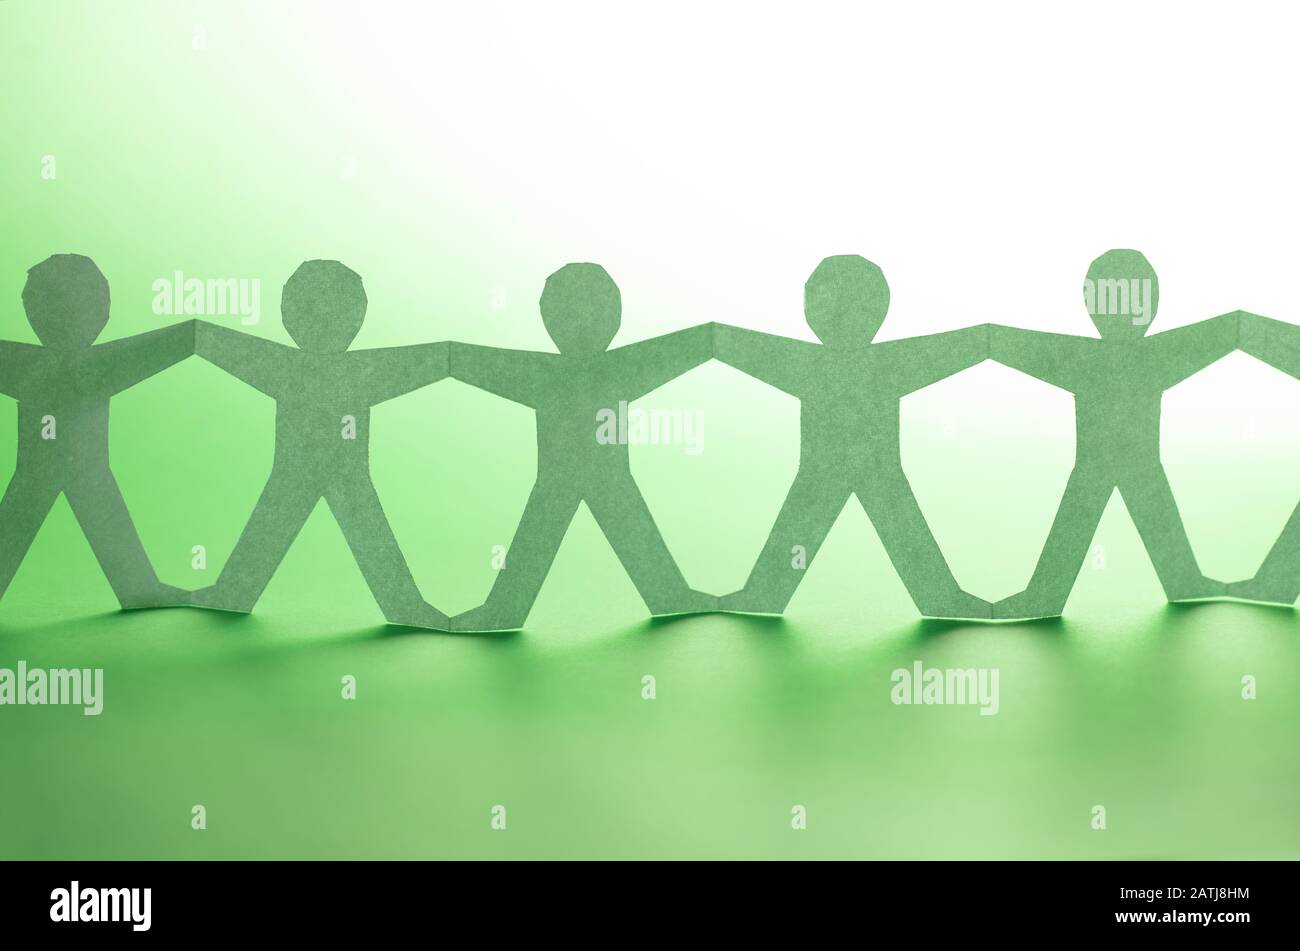 Team of paper chain people. Human chain with light and shadow on green backgorund. Stock Photo